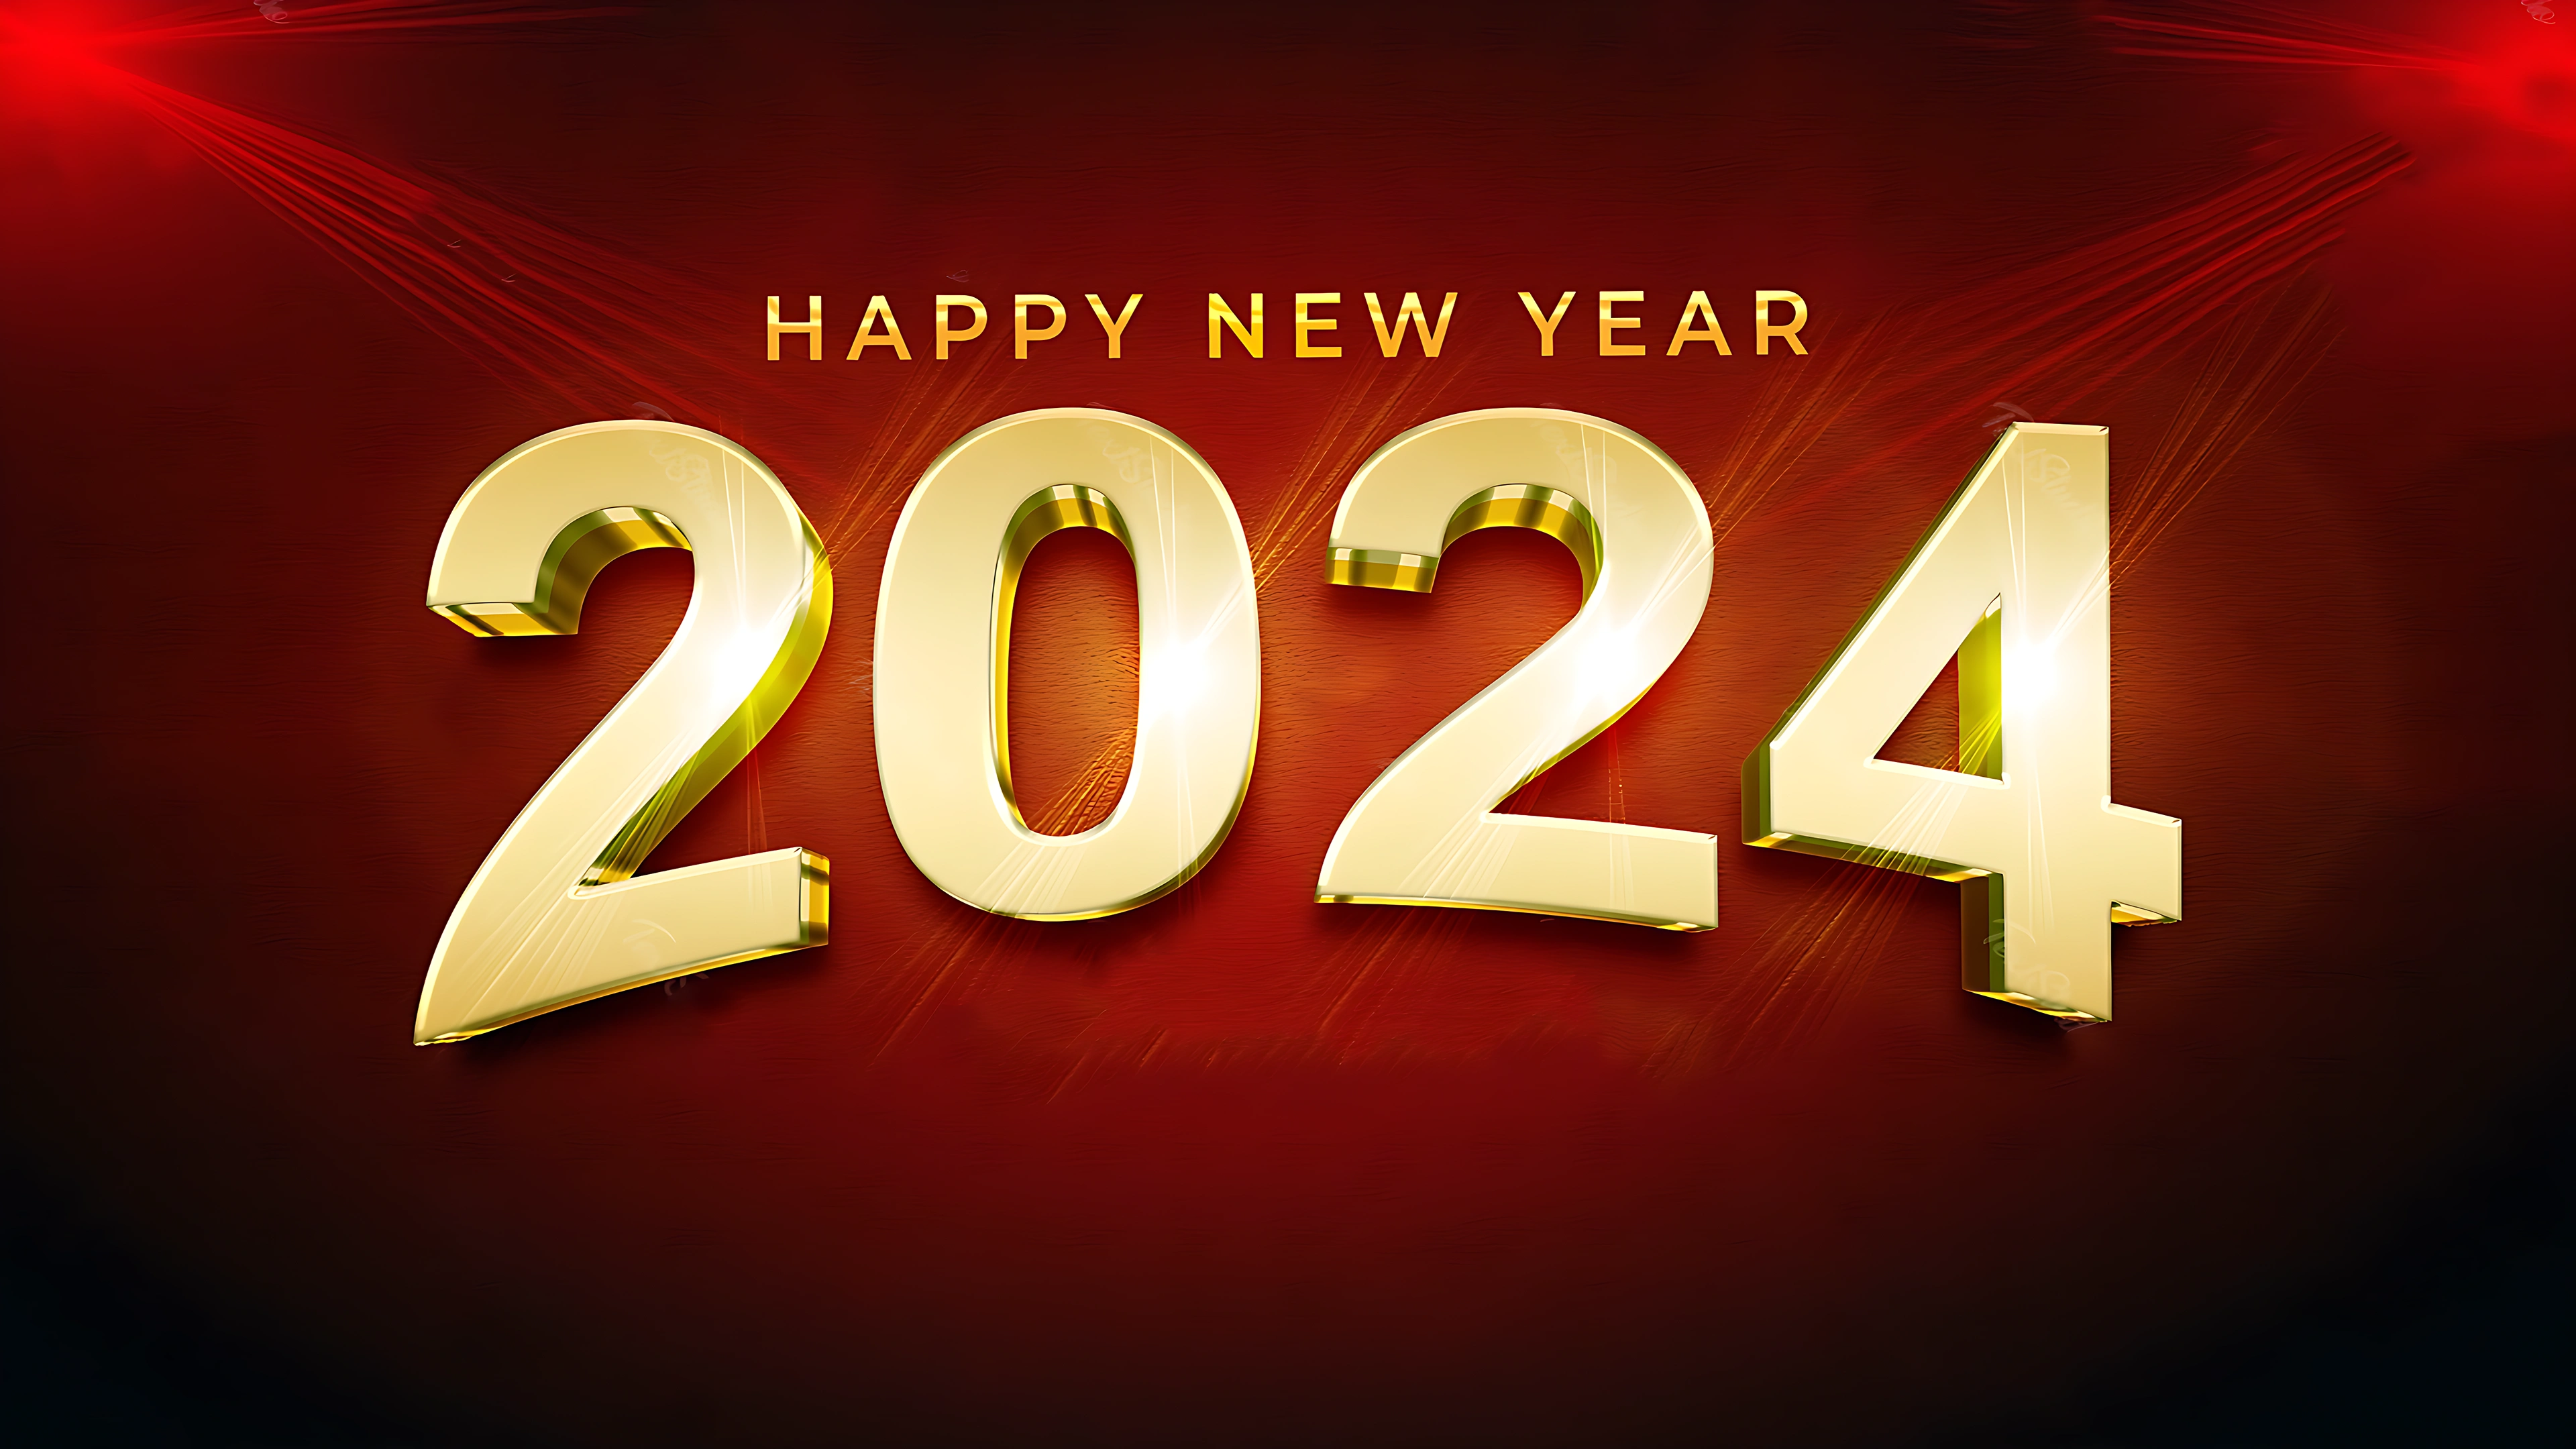 Happy New Year 2024 Golden Text and red background effect 4K UHD Wallpaper for desktop pc